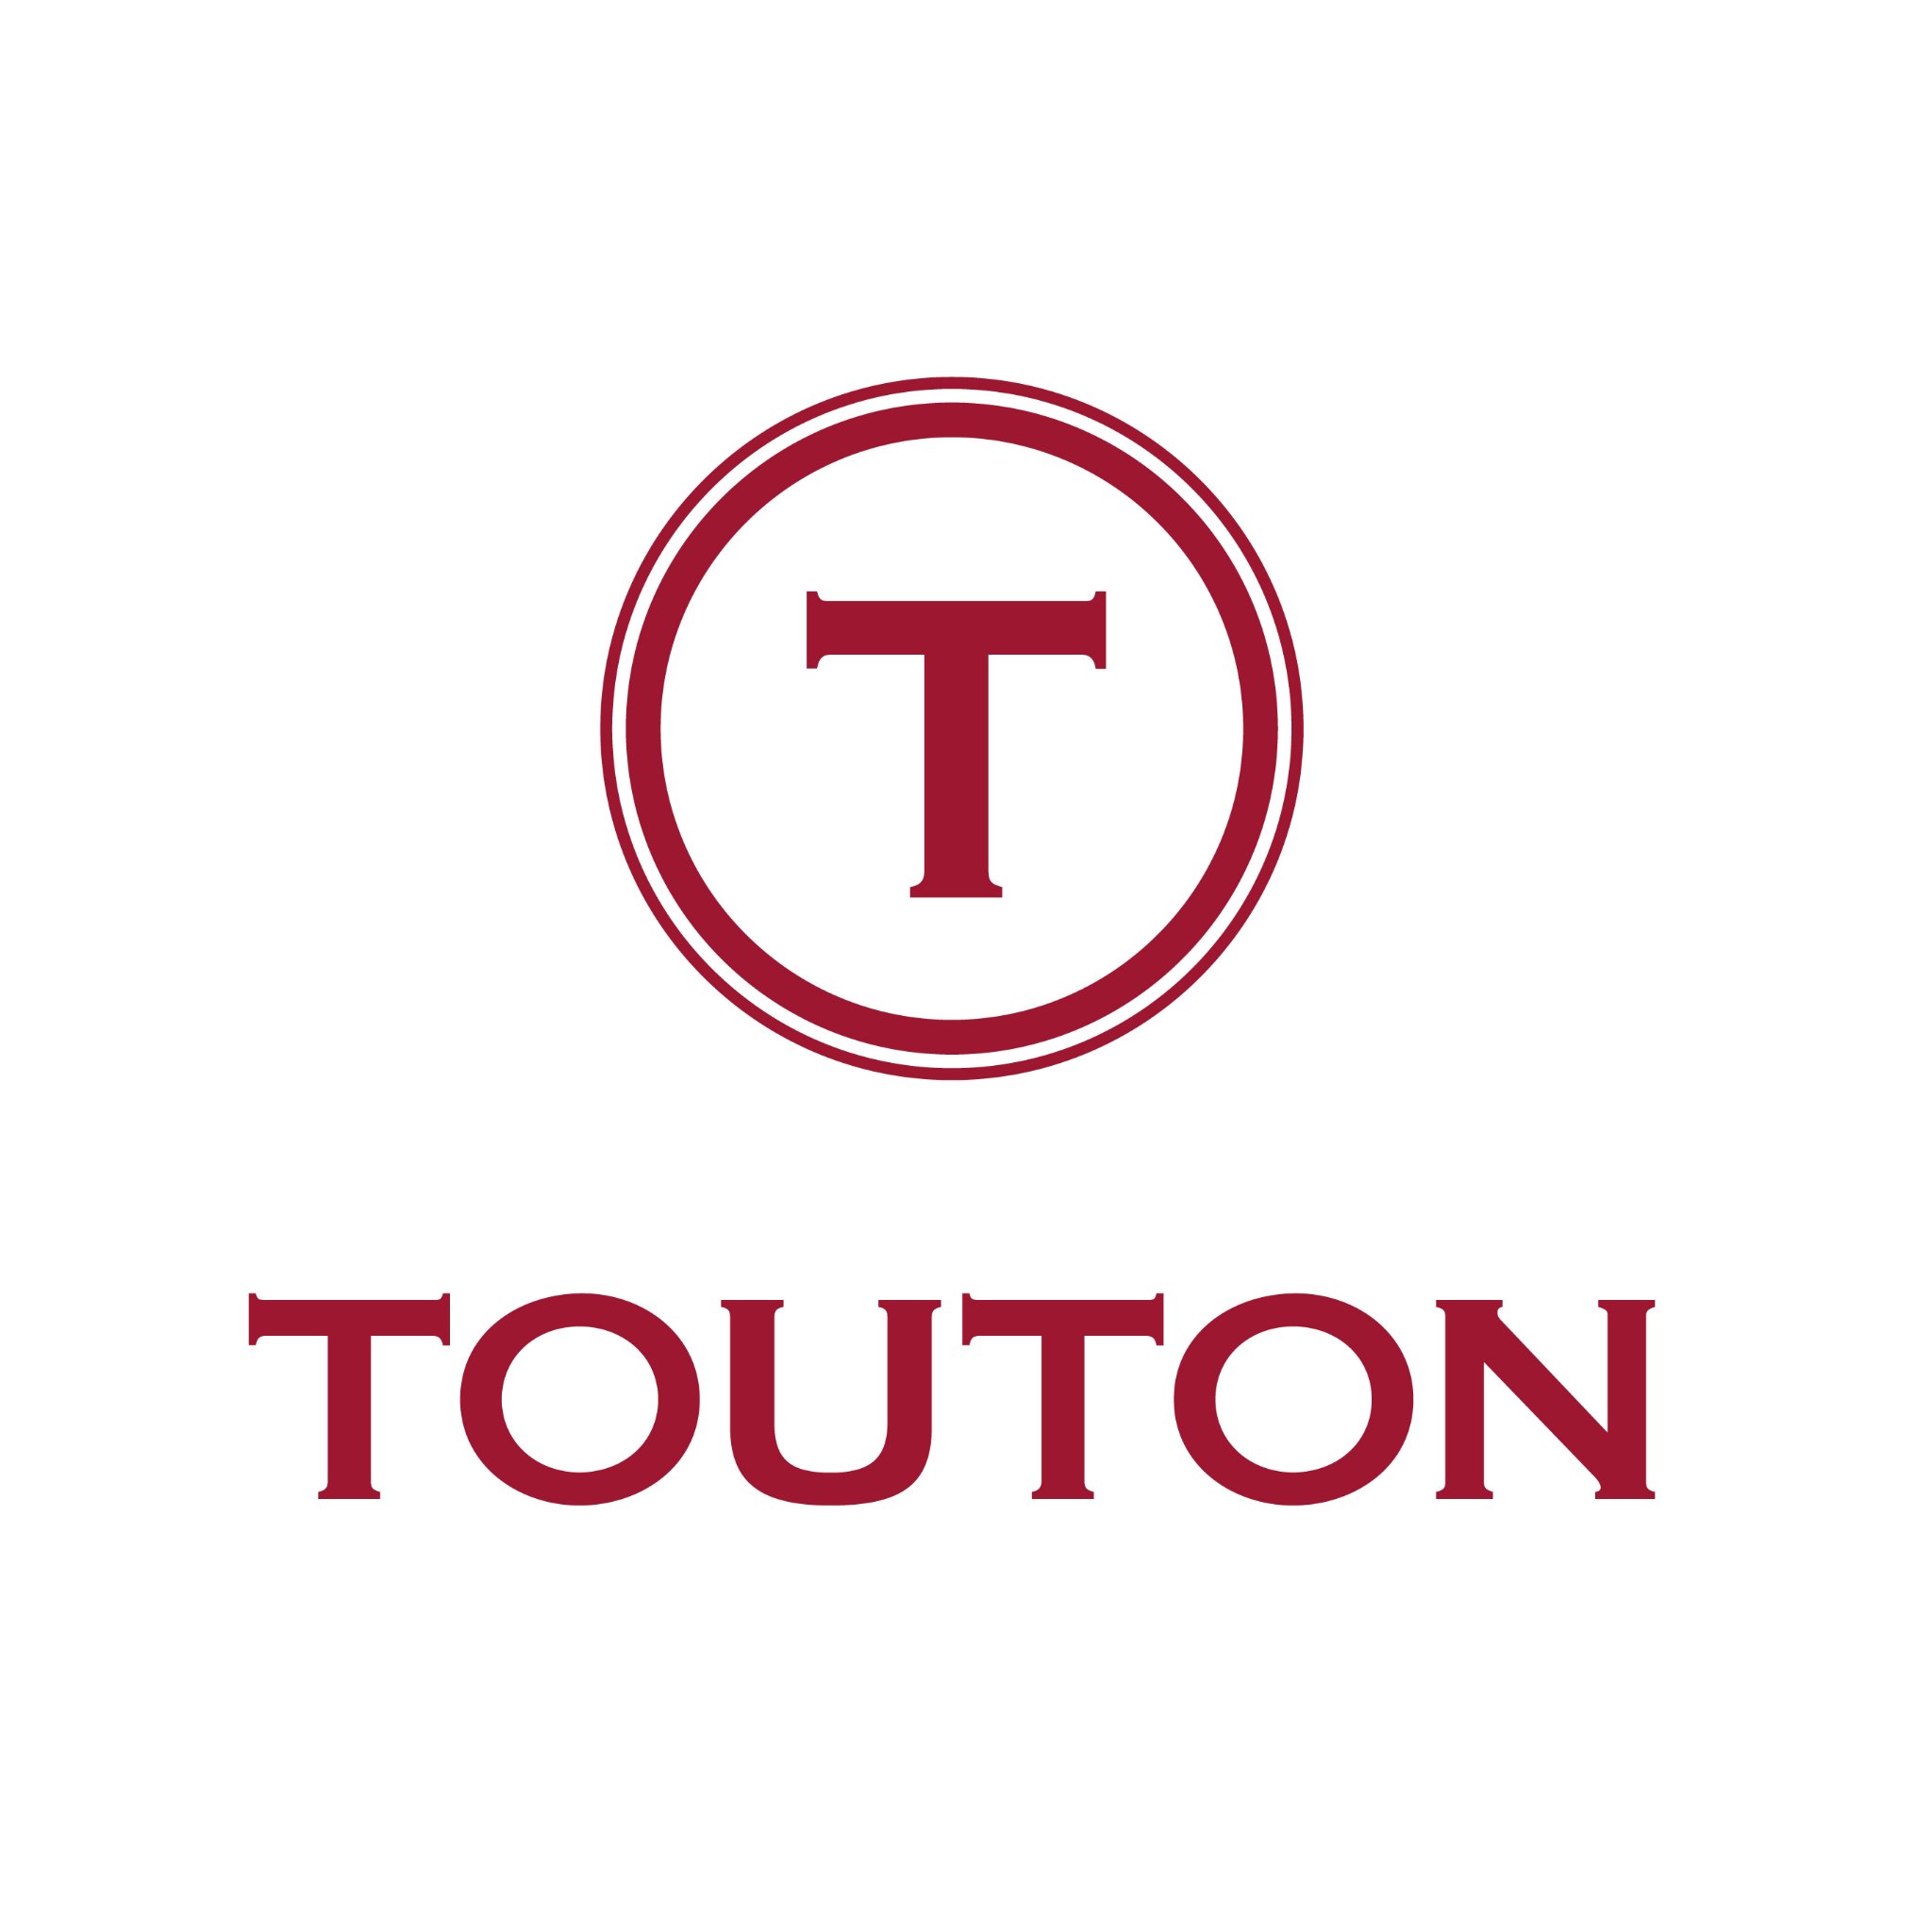 Touton is a leading agro-industrial actor. Vanilla, Spices and Ingredients have been a key component of Touton’s bustling trade activity since its foundation.